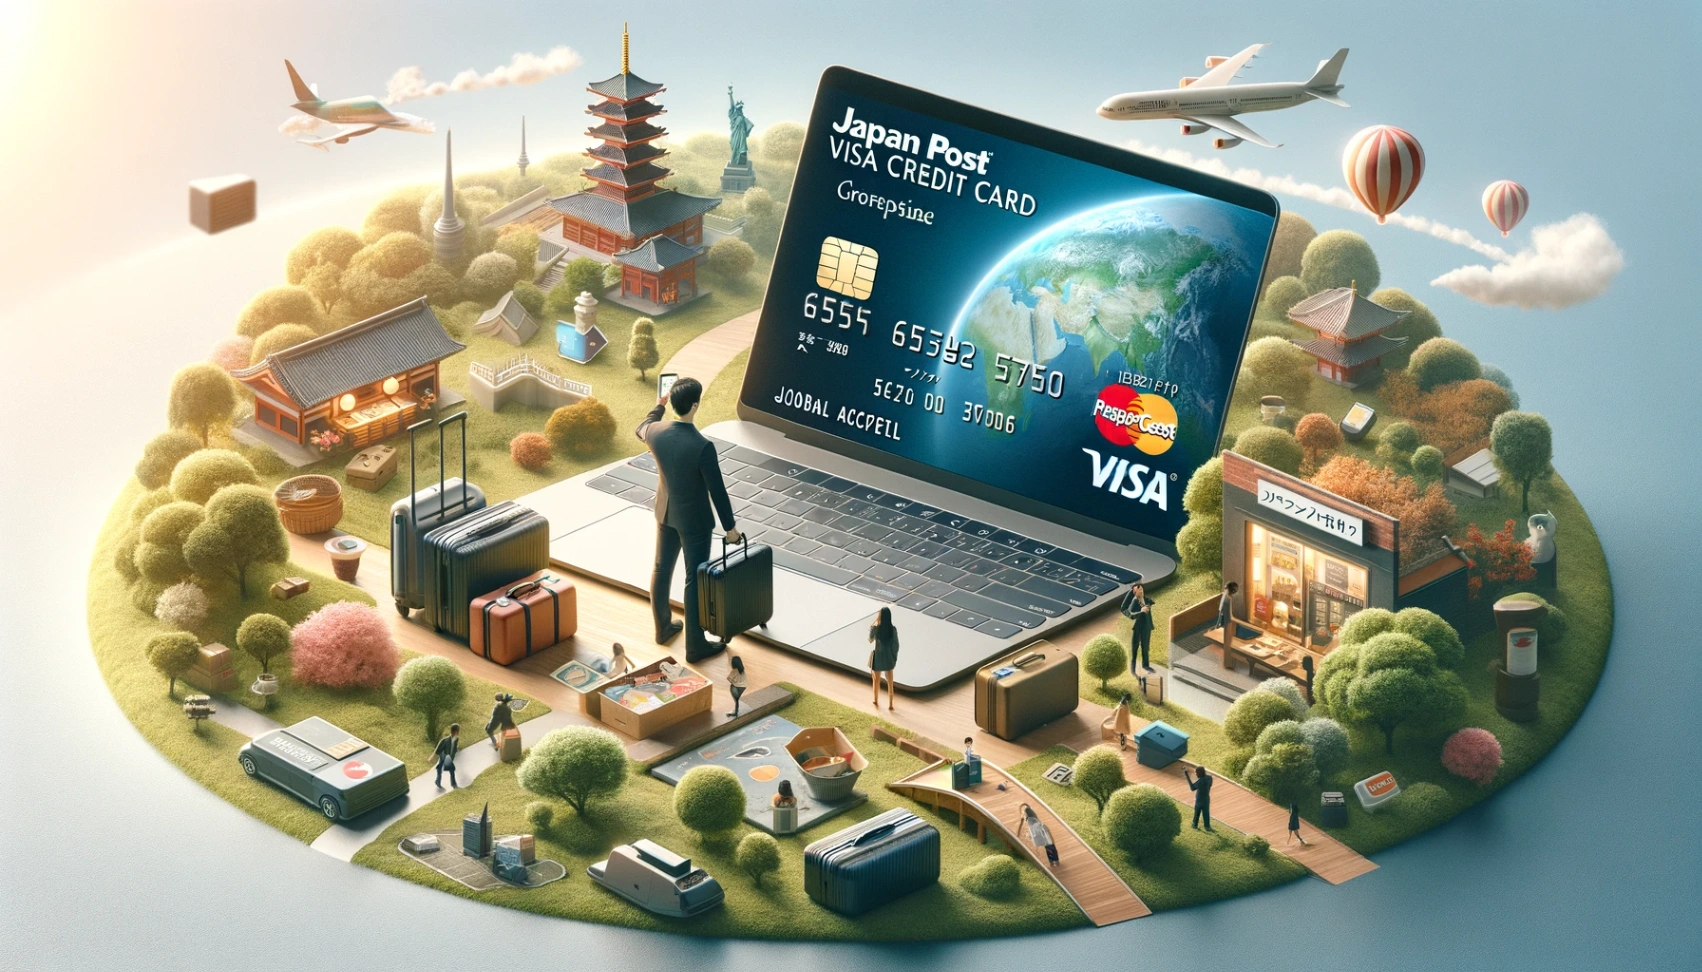 Japan Post Visa Credit Card: Learn the Benefits and How to Apply